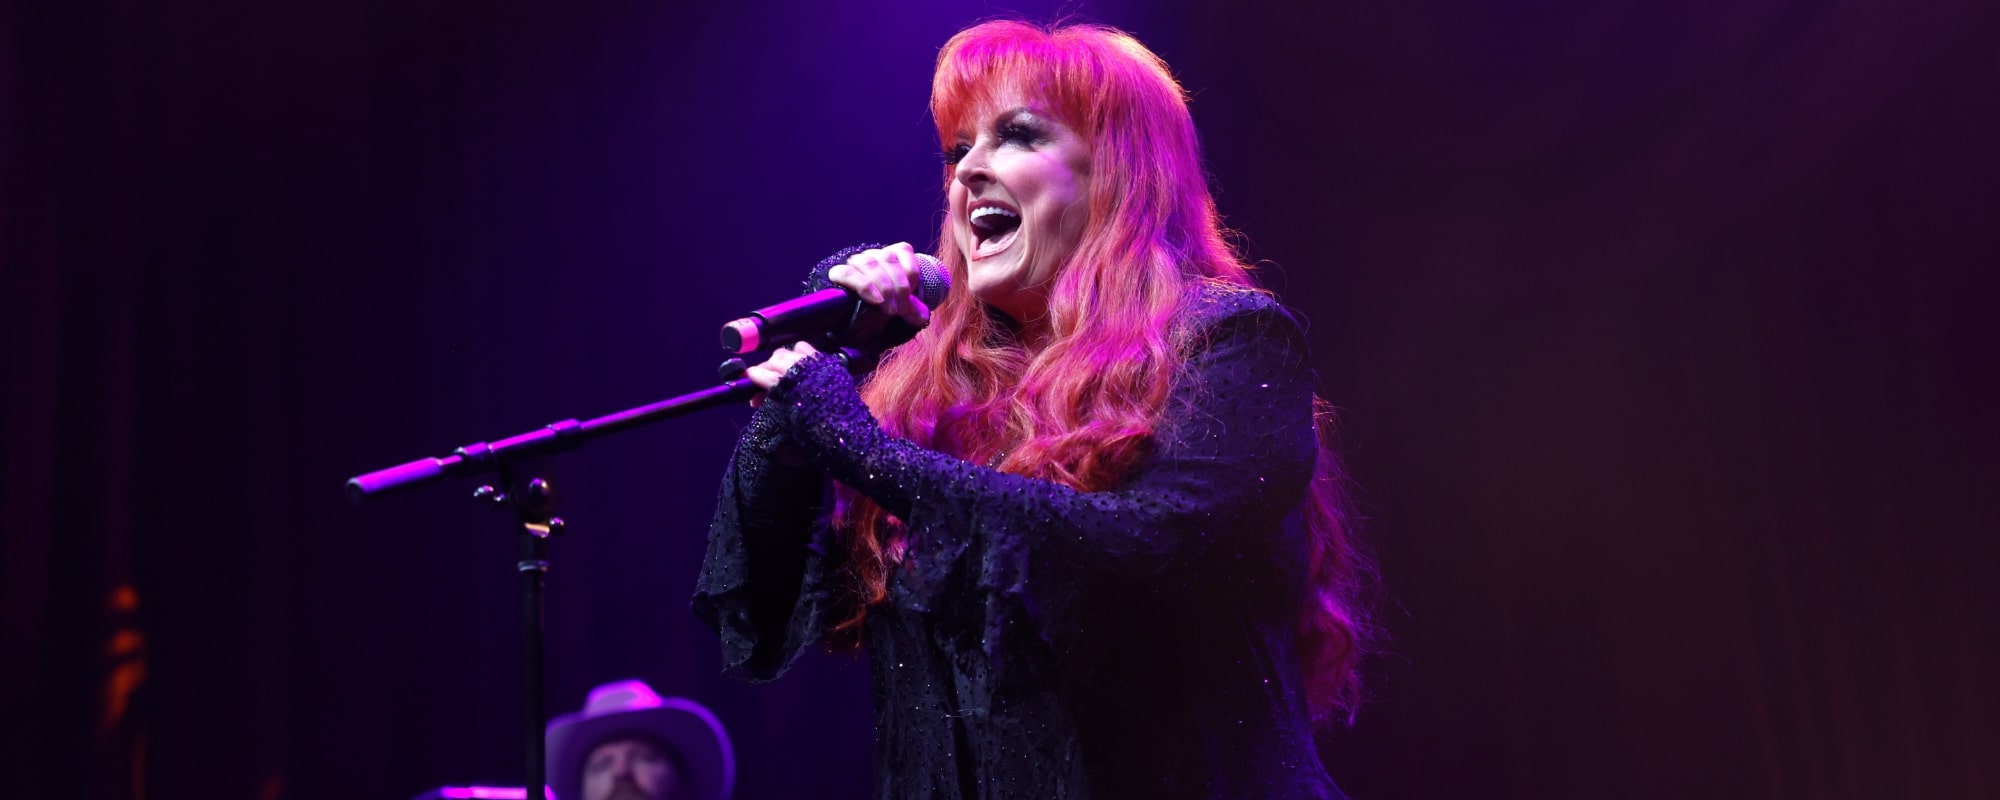 Wynonna Judd Shares Snow Day Activities With Donkeys, Pigs, & Family at Her Tennessee Farm: “I Love This Little Life”